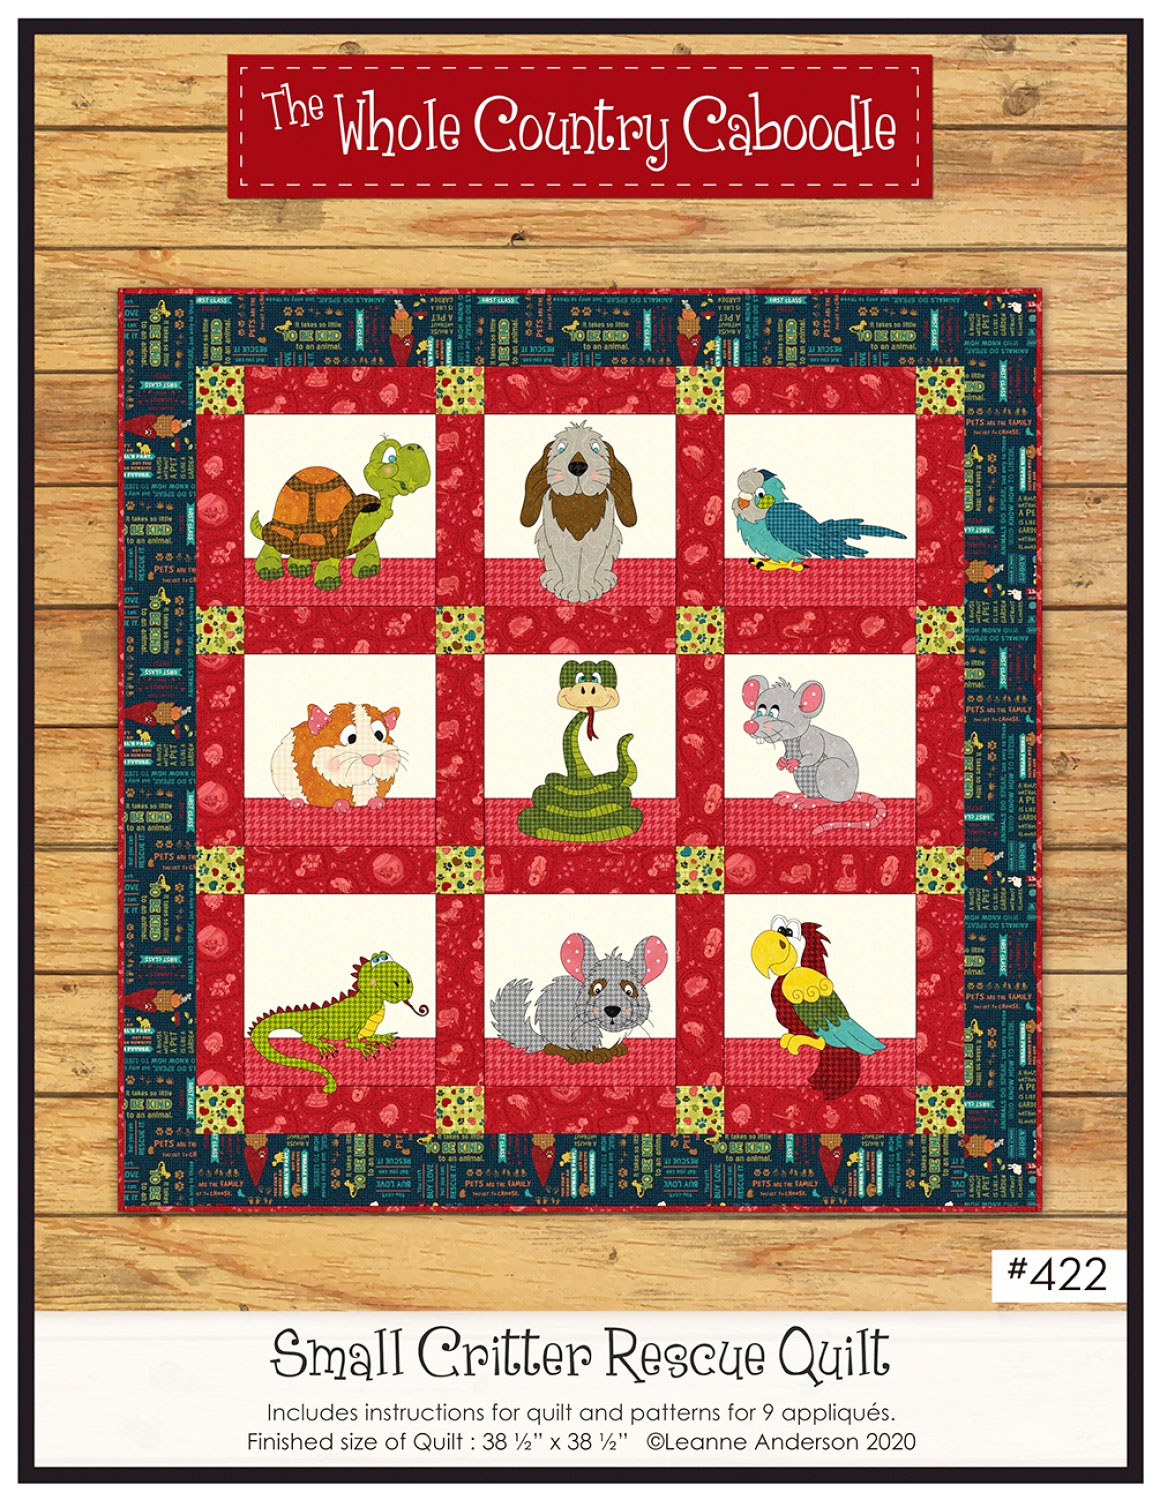 Small-Critter-Rescue-Quilt-sewing-pattern-The-Whole-Country-Caboodle-front